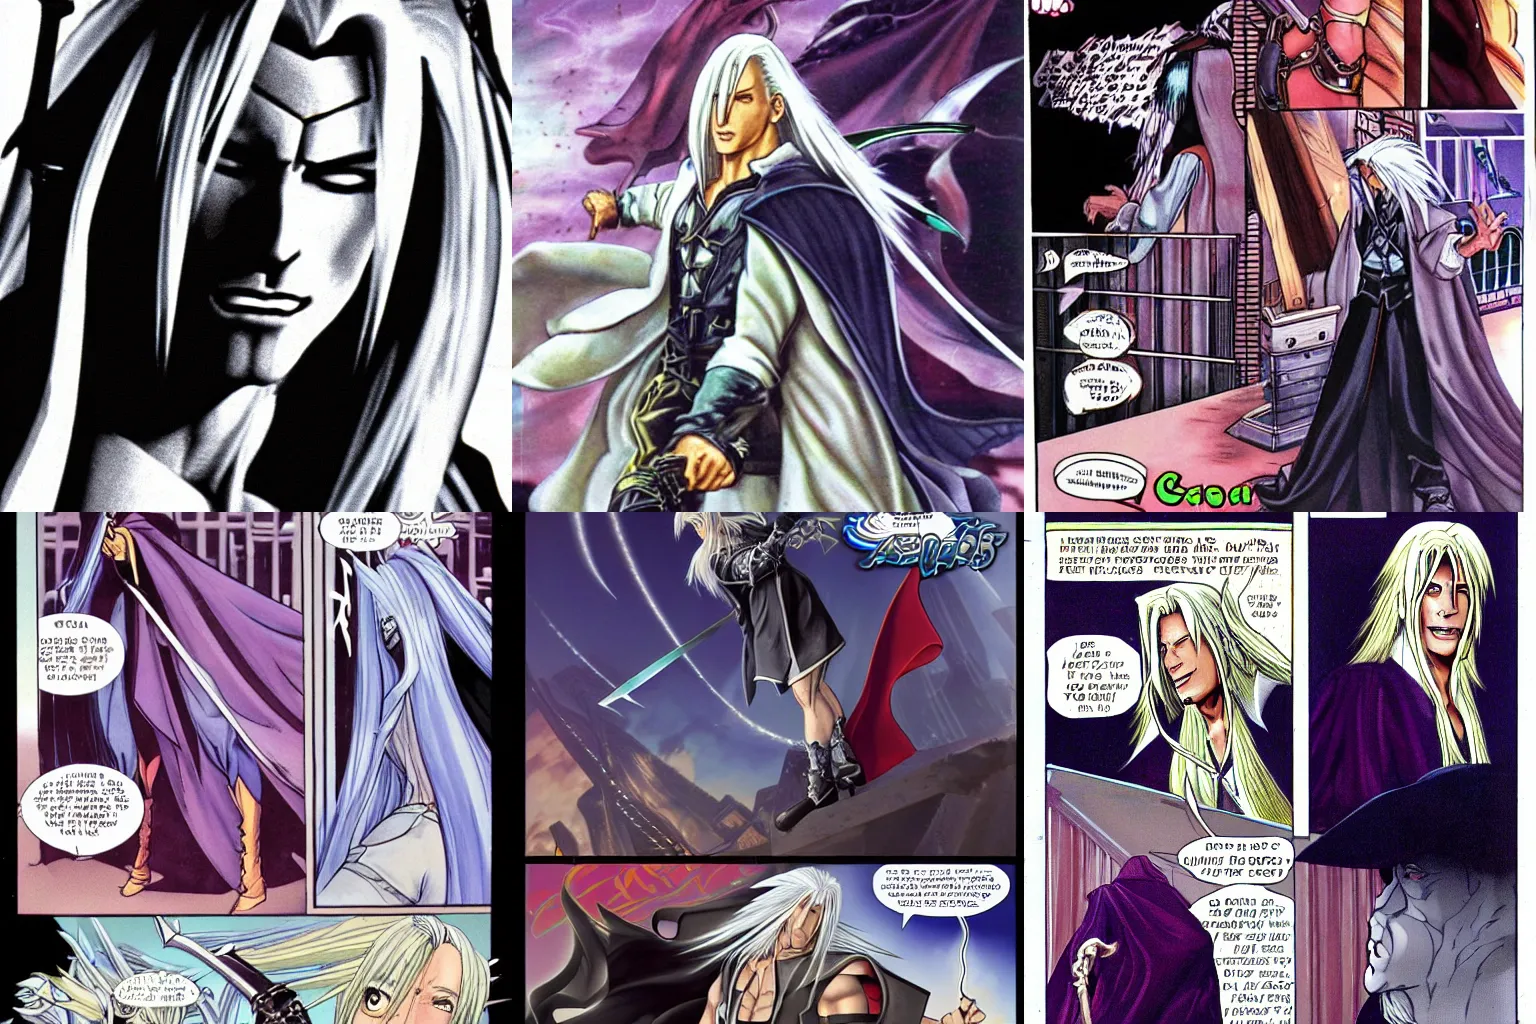 Prompt: Sephiroth as a guest character in the new adventures of old christine, high quality